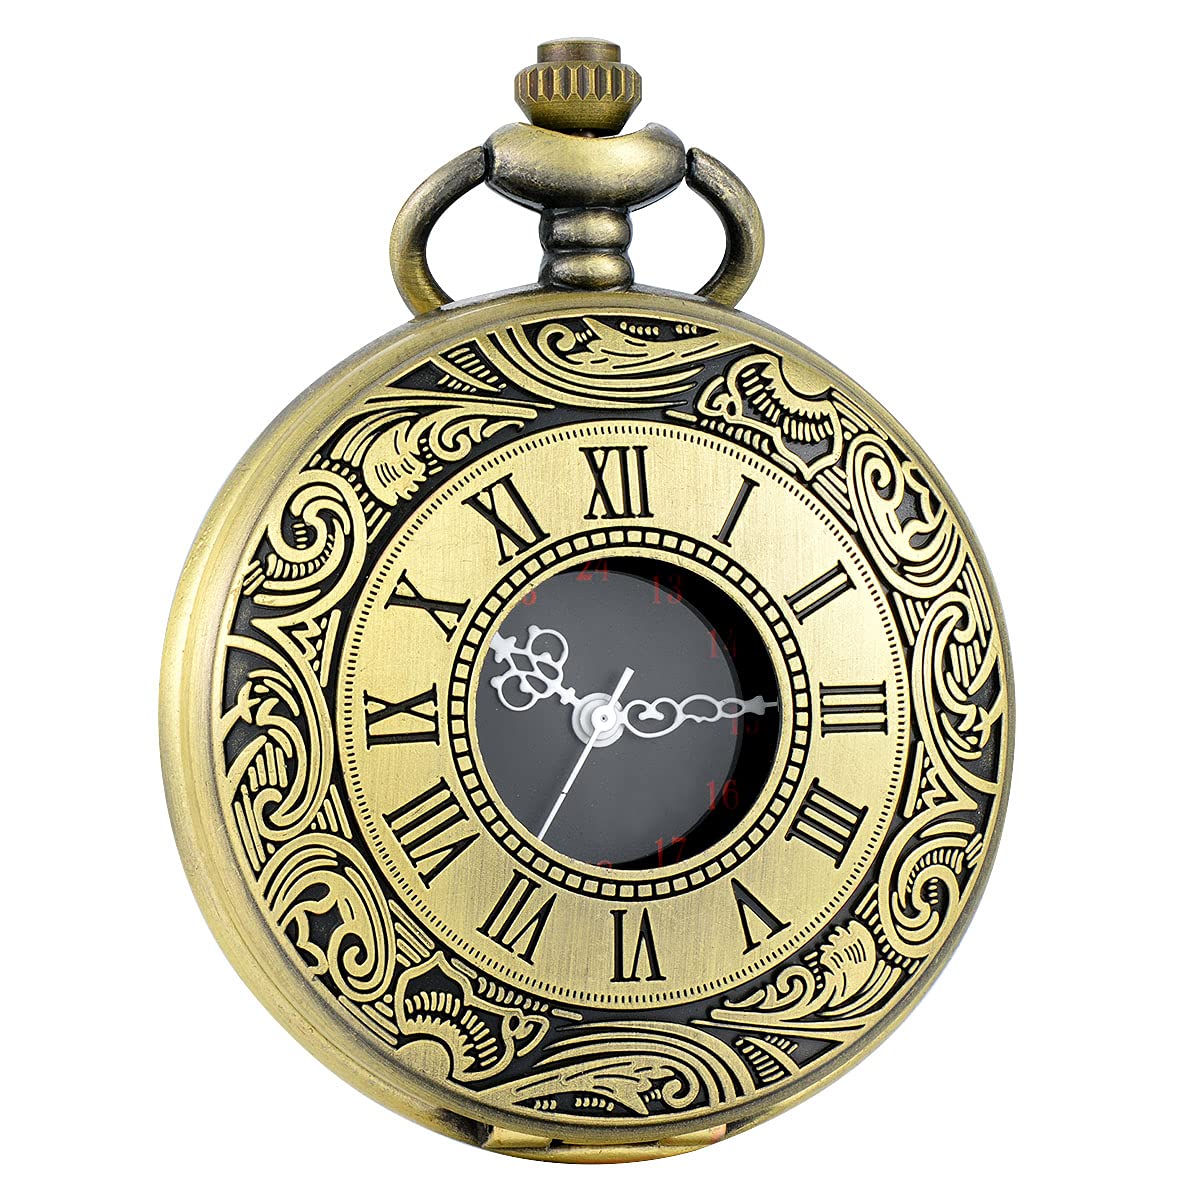 LYMFHCH Vintage Pocket Watch Roman Numerals Scale Quartz Pocket Watches with Chain Christmas Graduation Birthday Gifts Fathers Day